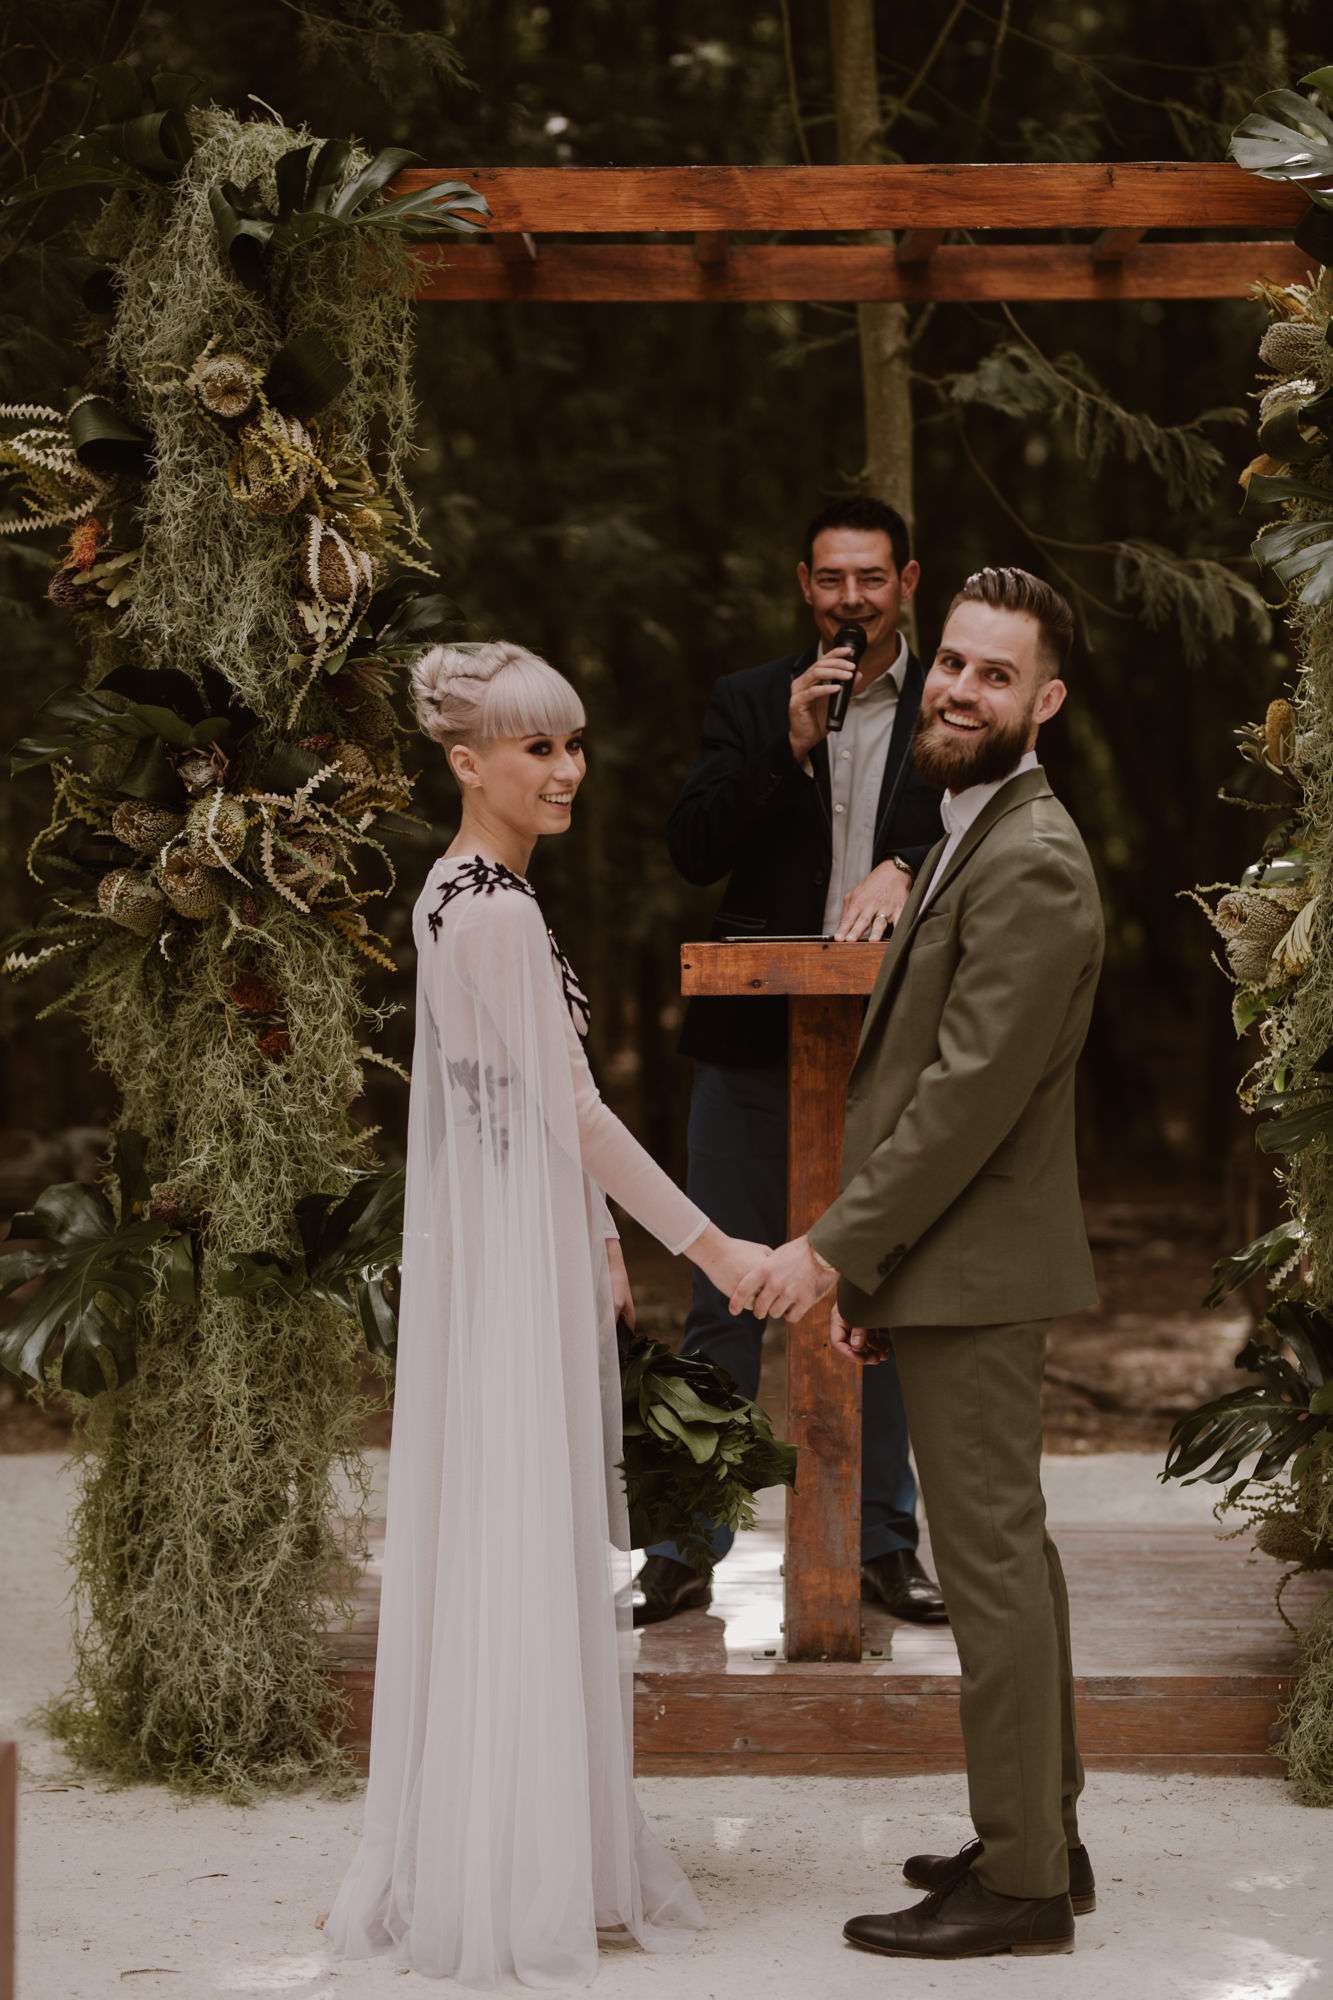 Neutral & Natural Forest Wedding in South Africa · Rock n Roll Bride